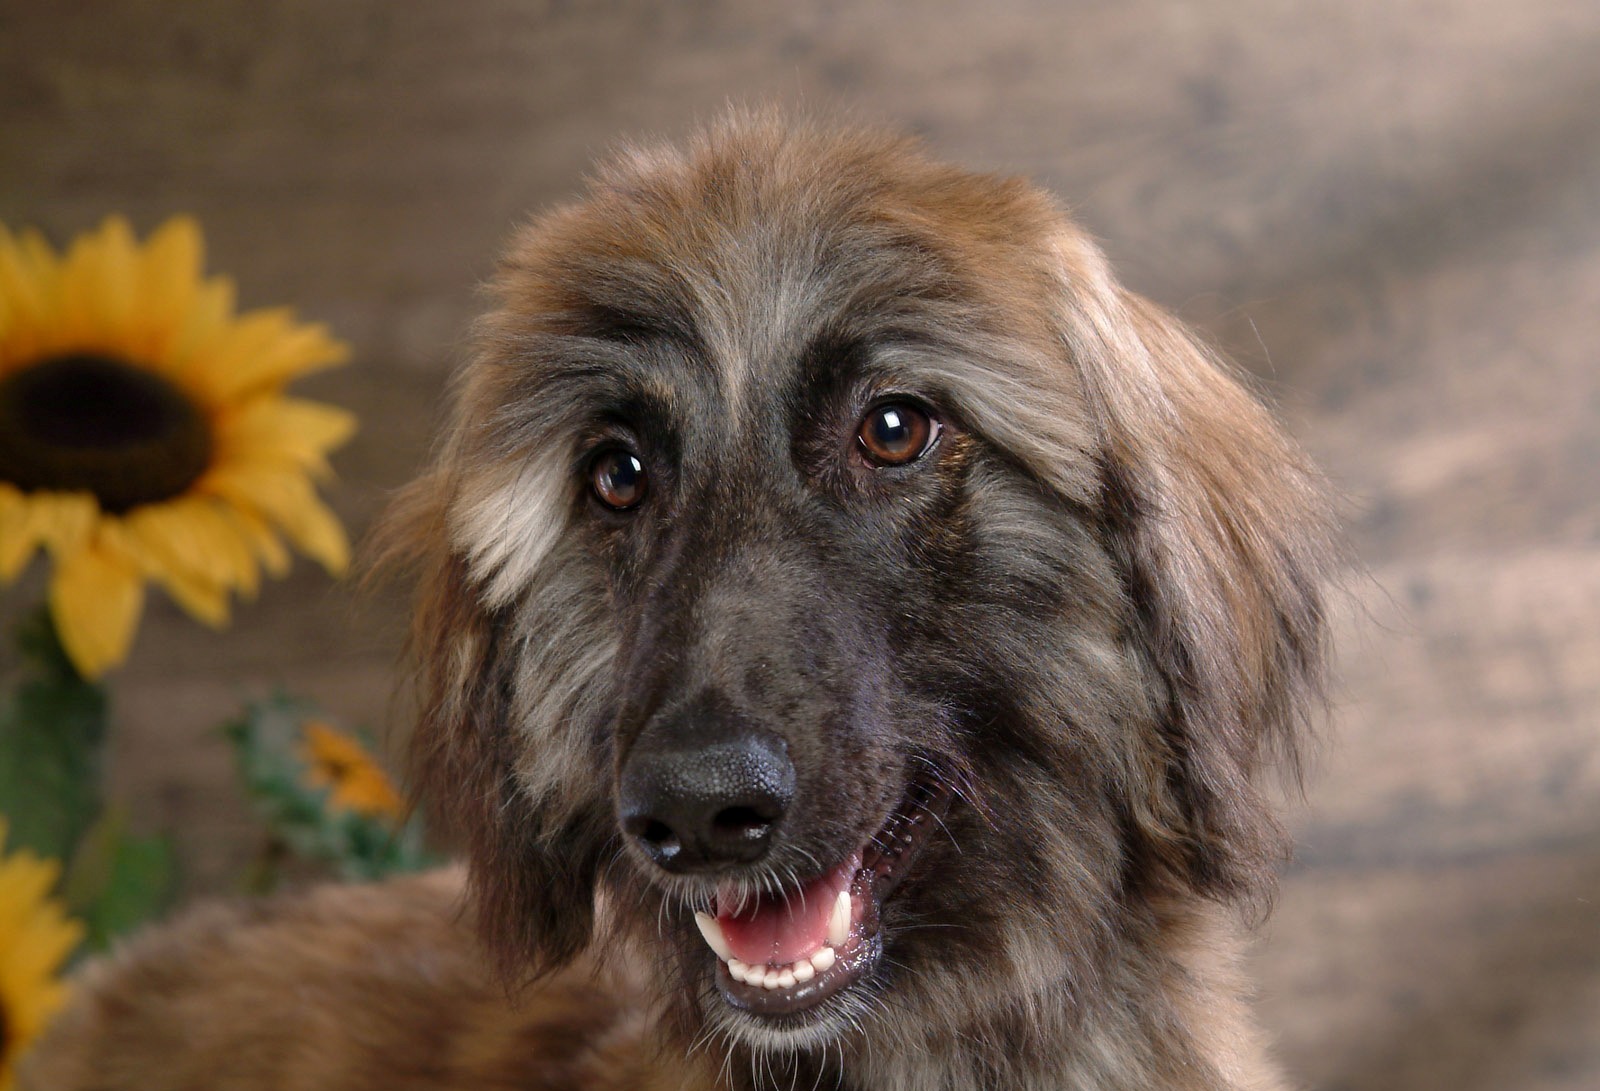 Afghan Hound on the background of sunflowers wallpaper